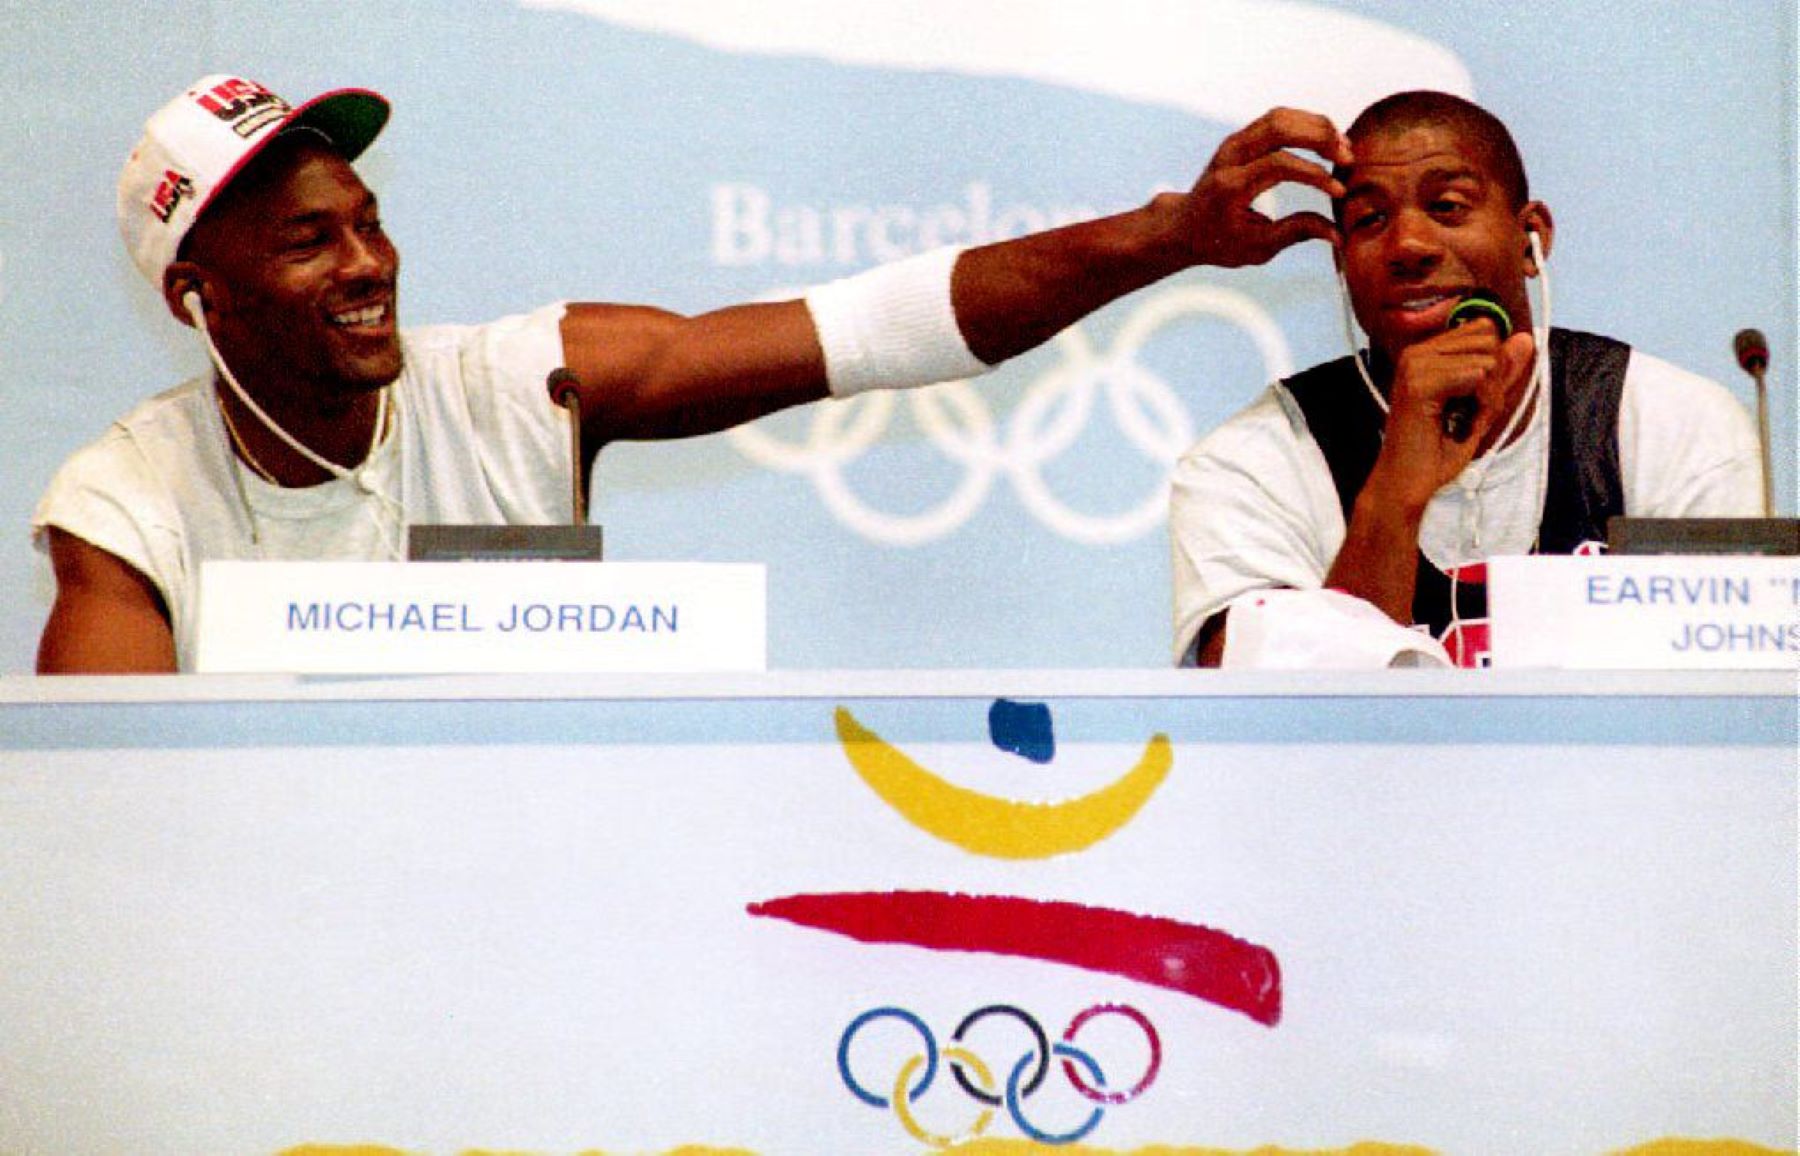 Michael Jordan and Magic Johnson laugh during a press conference for the U.S. Olympic 'Dream Team'